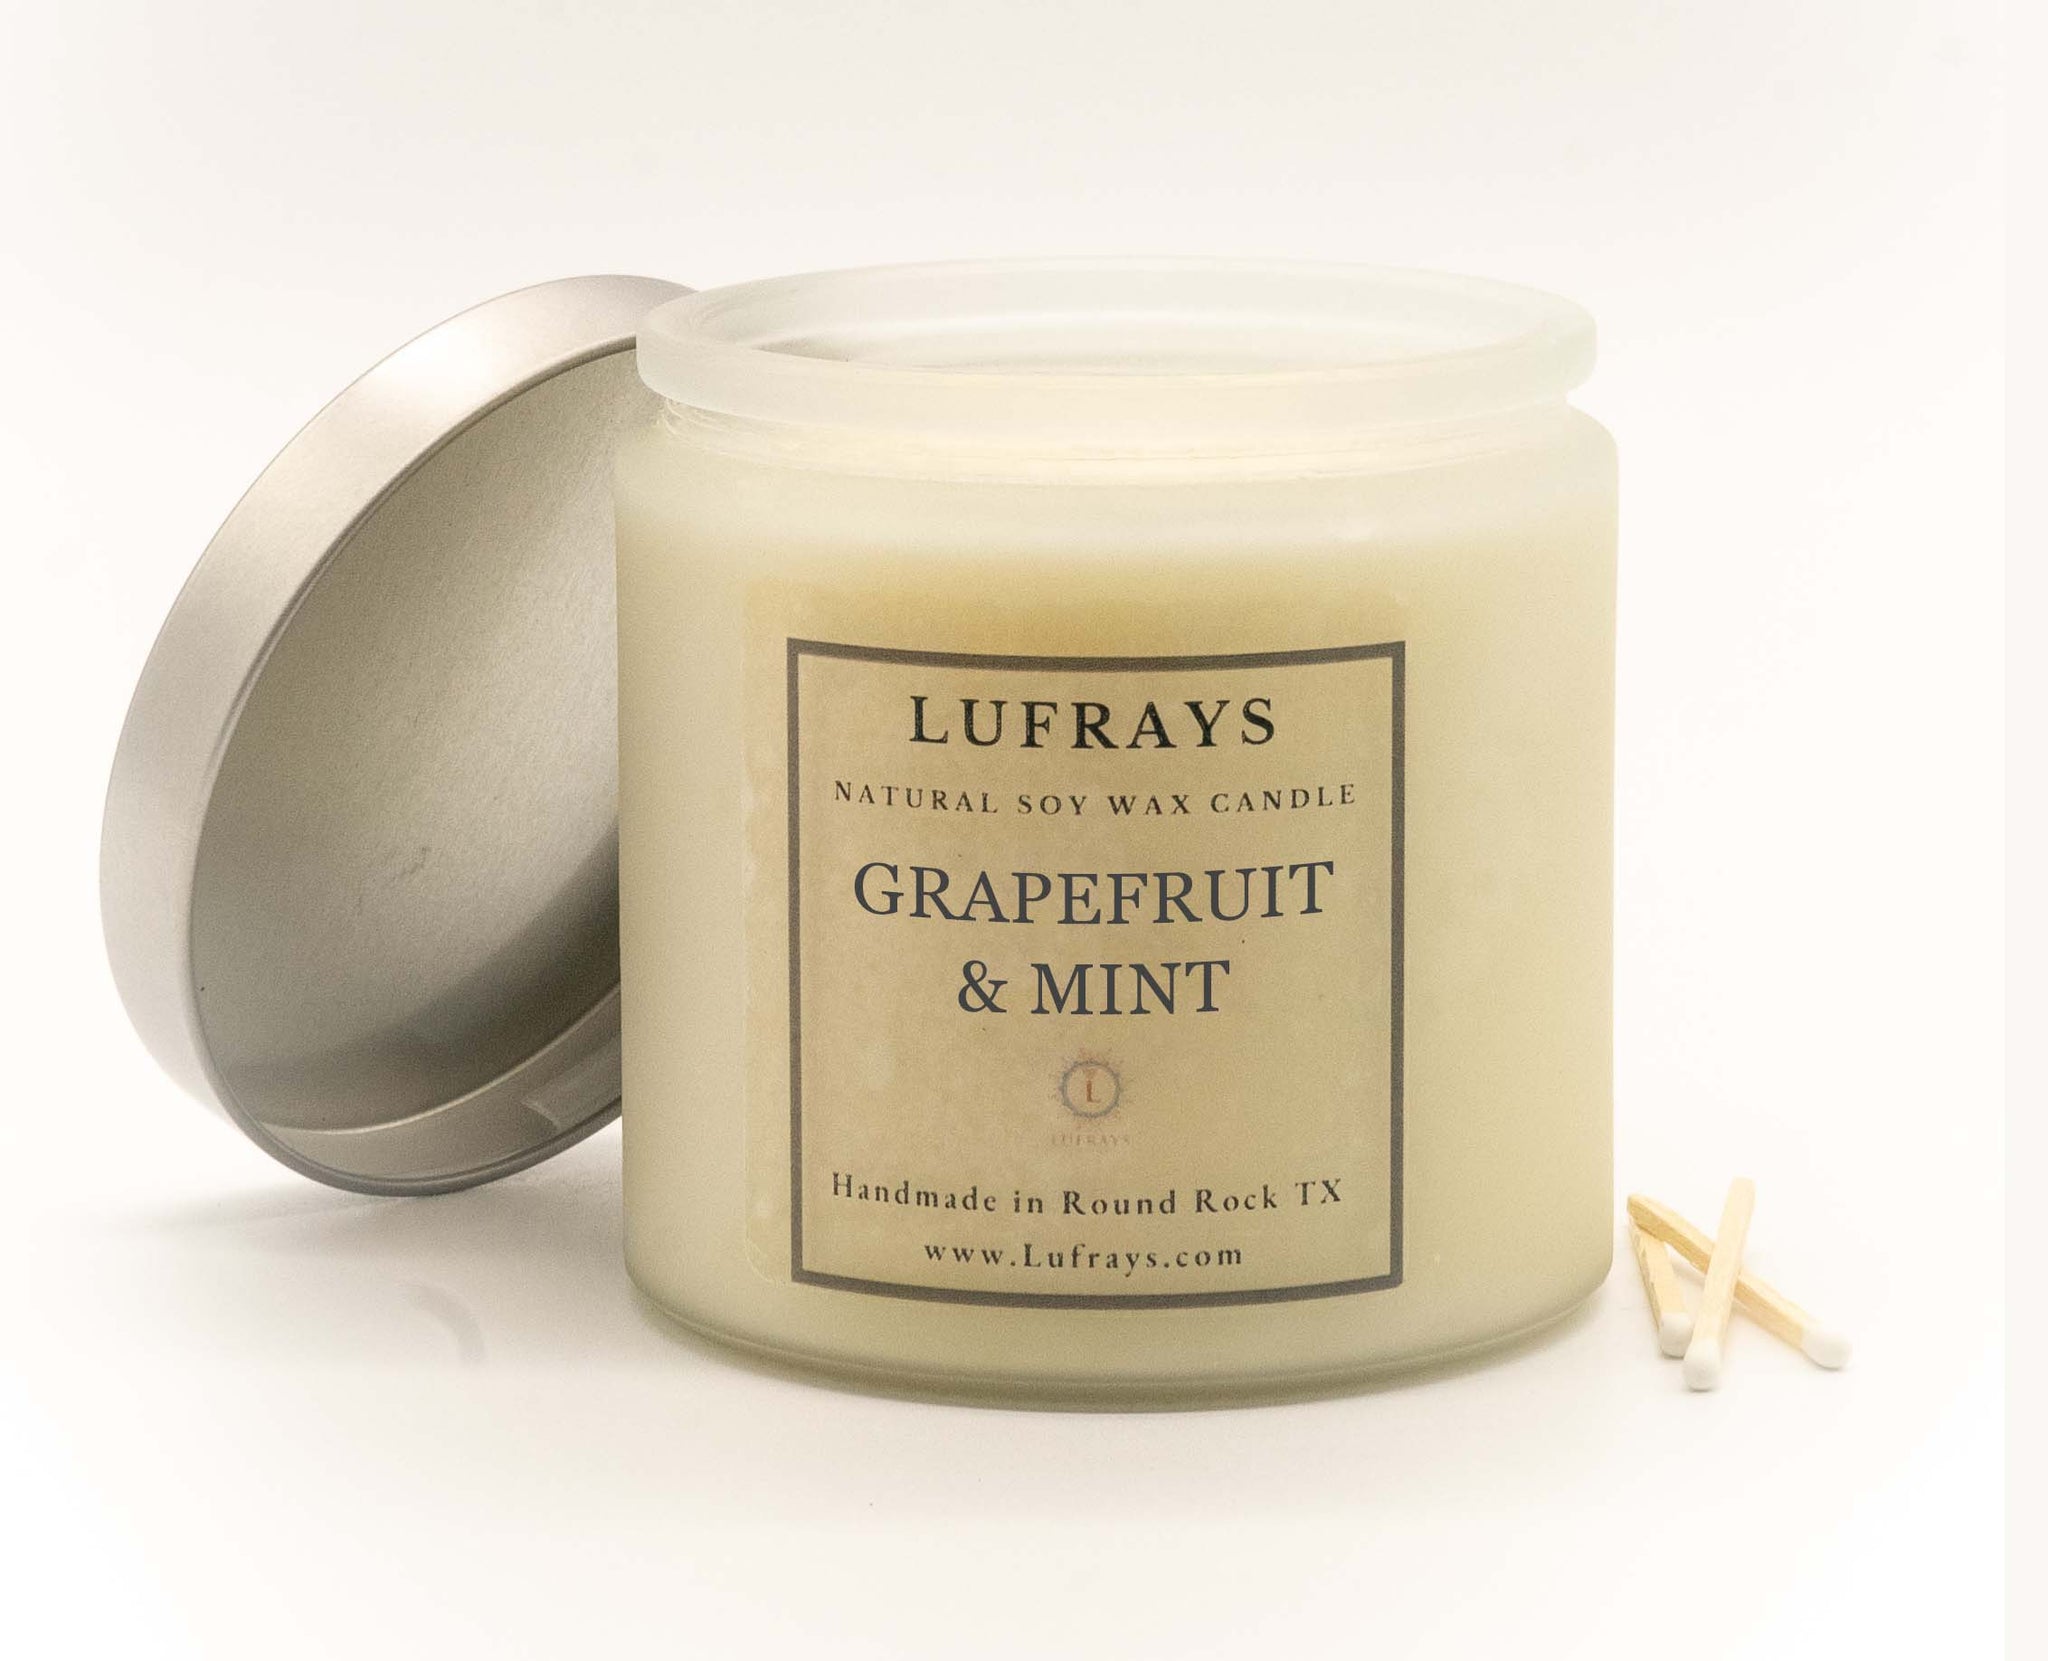 Luxury Handmade Scented Soy Candle in Grapefruit and Mint in Frosted Jar